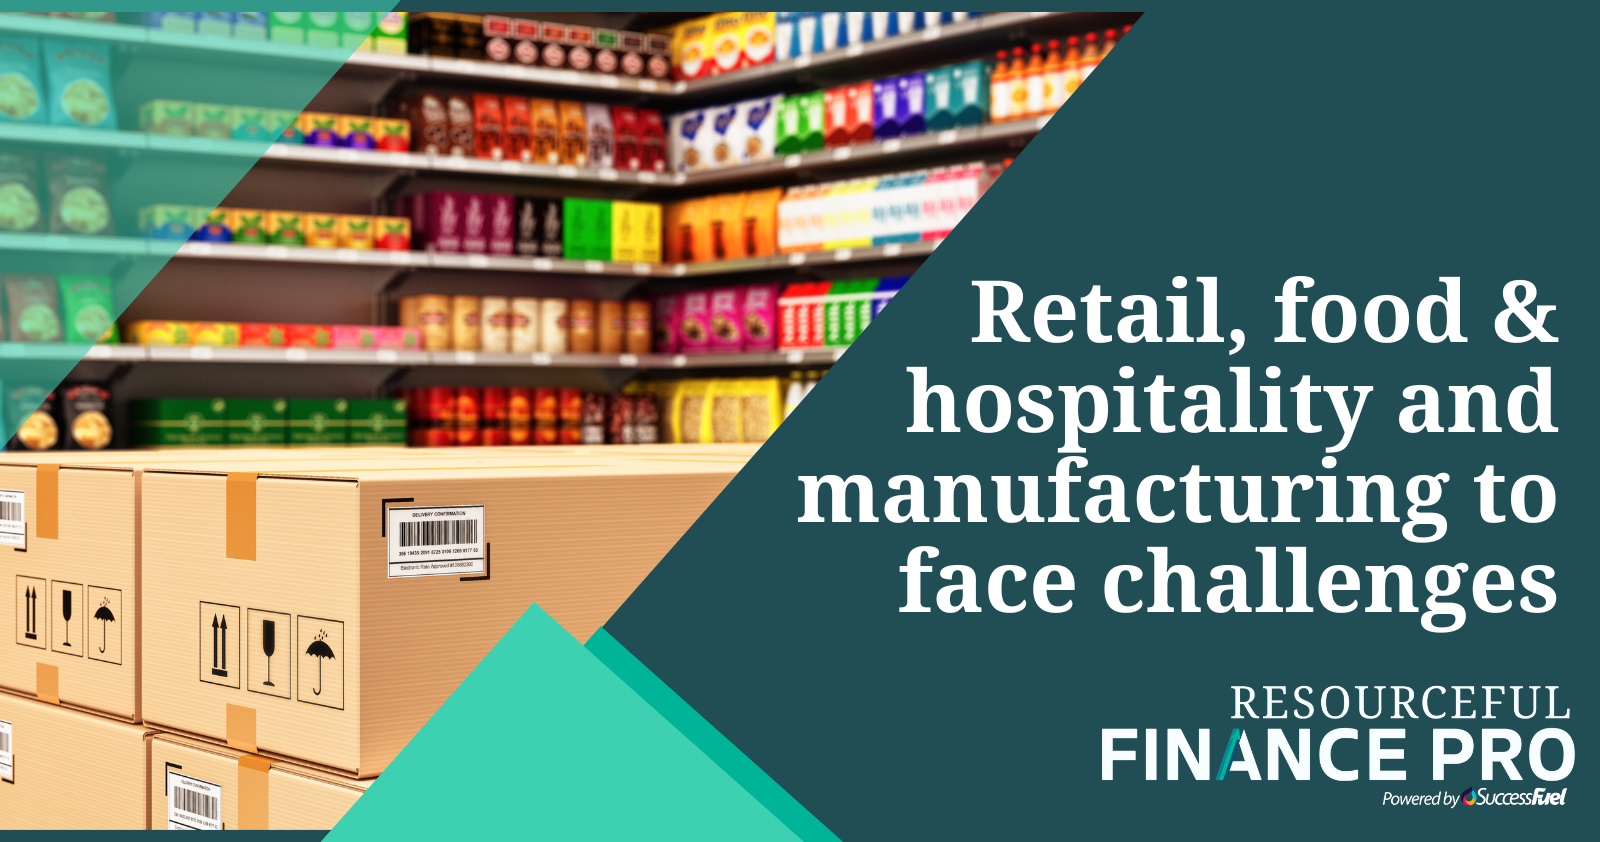 Retail, food & hospitality and manufacturing to face challenges